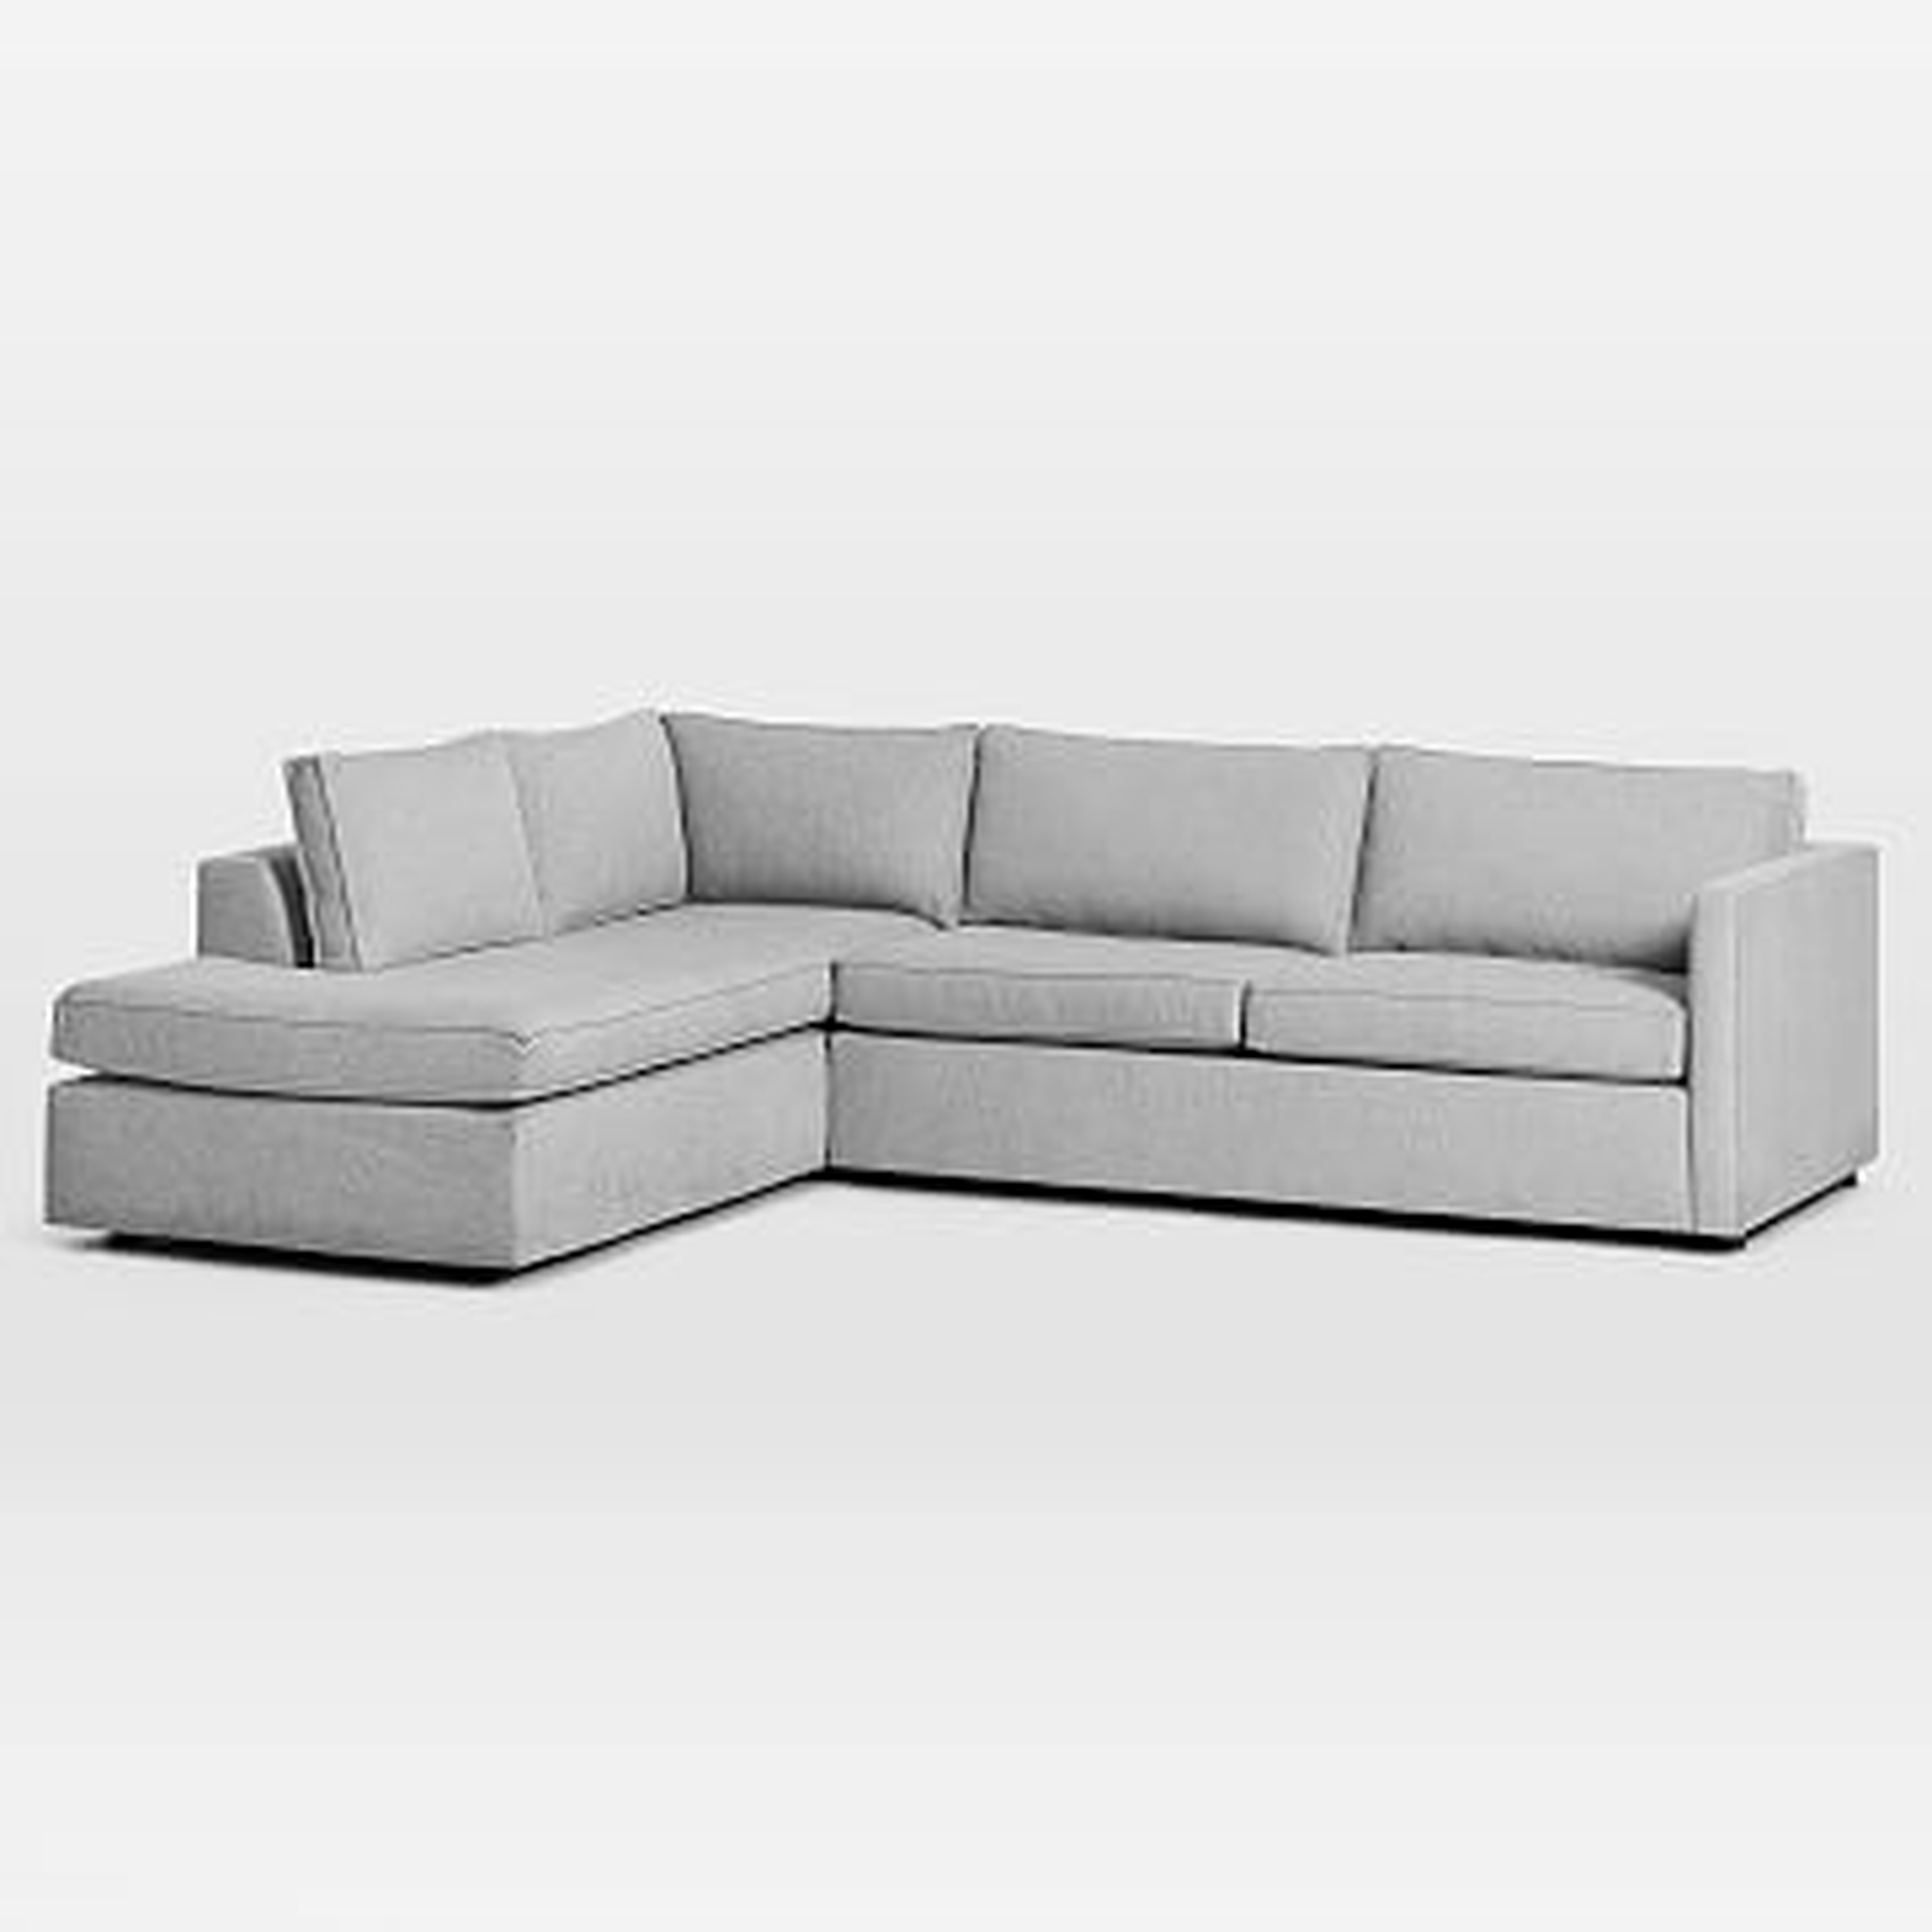 Harris Sectional Set 12: RA 75" Sofa, LA Terminal Chaise, Poly , Chenille Tweed, Storm Gray, Concealed Supports - West Elm